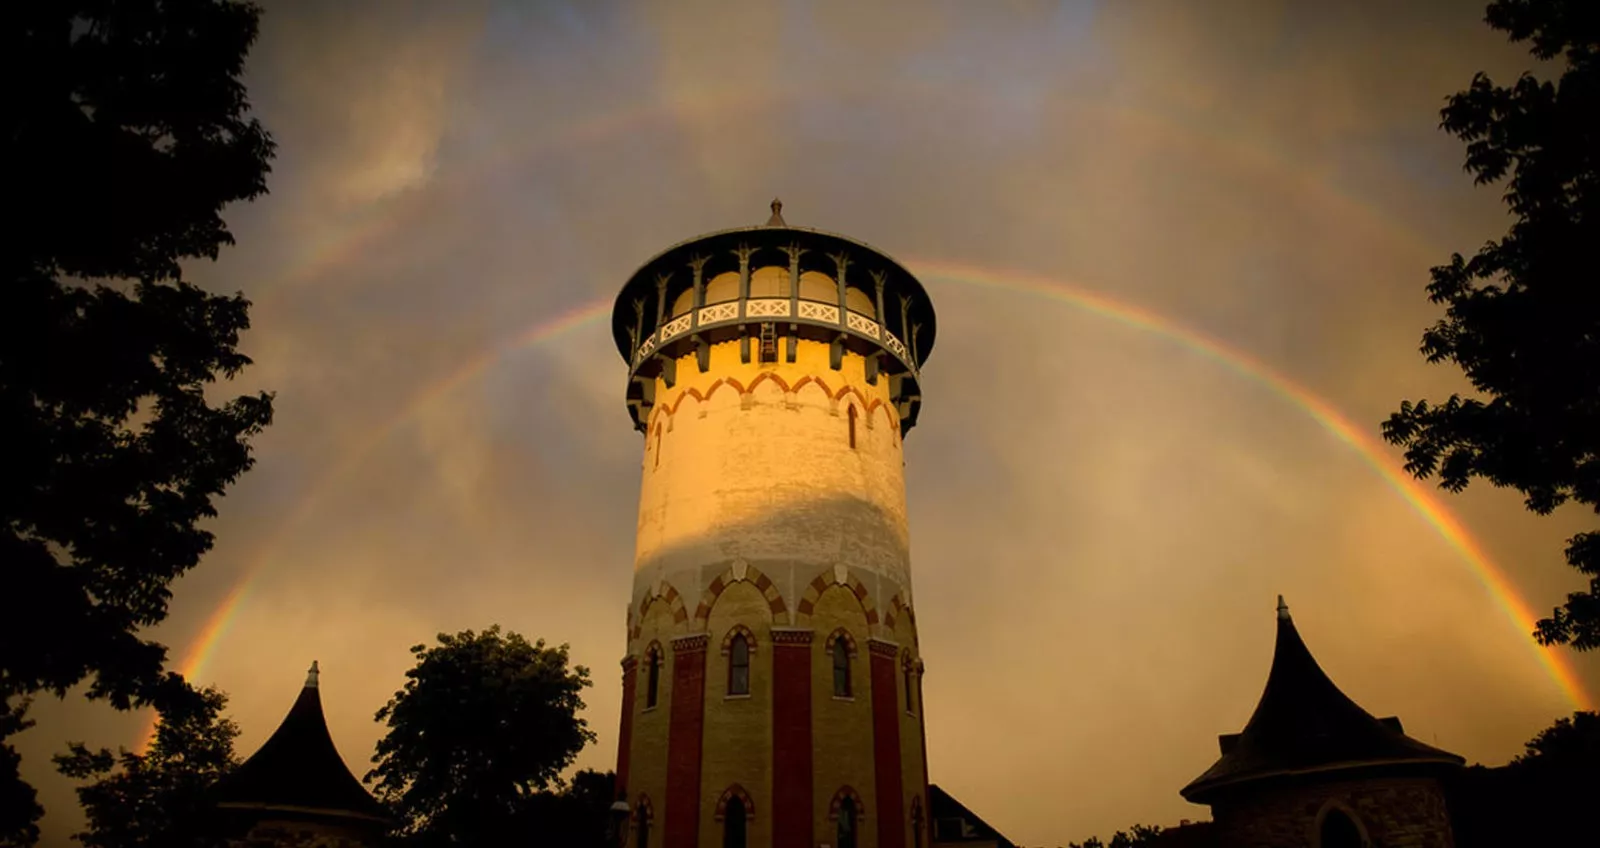 double rainbow over water tower painted red and yellow with pointed top